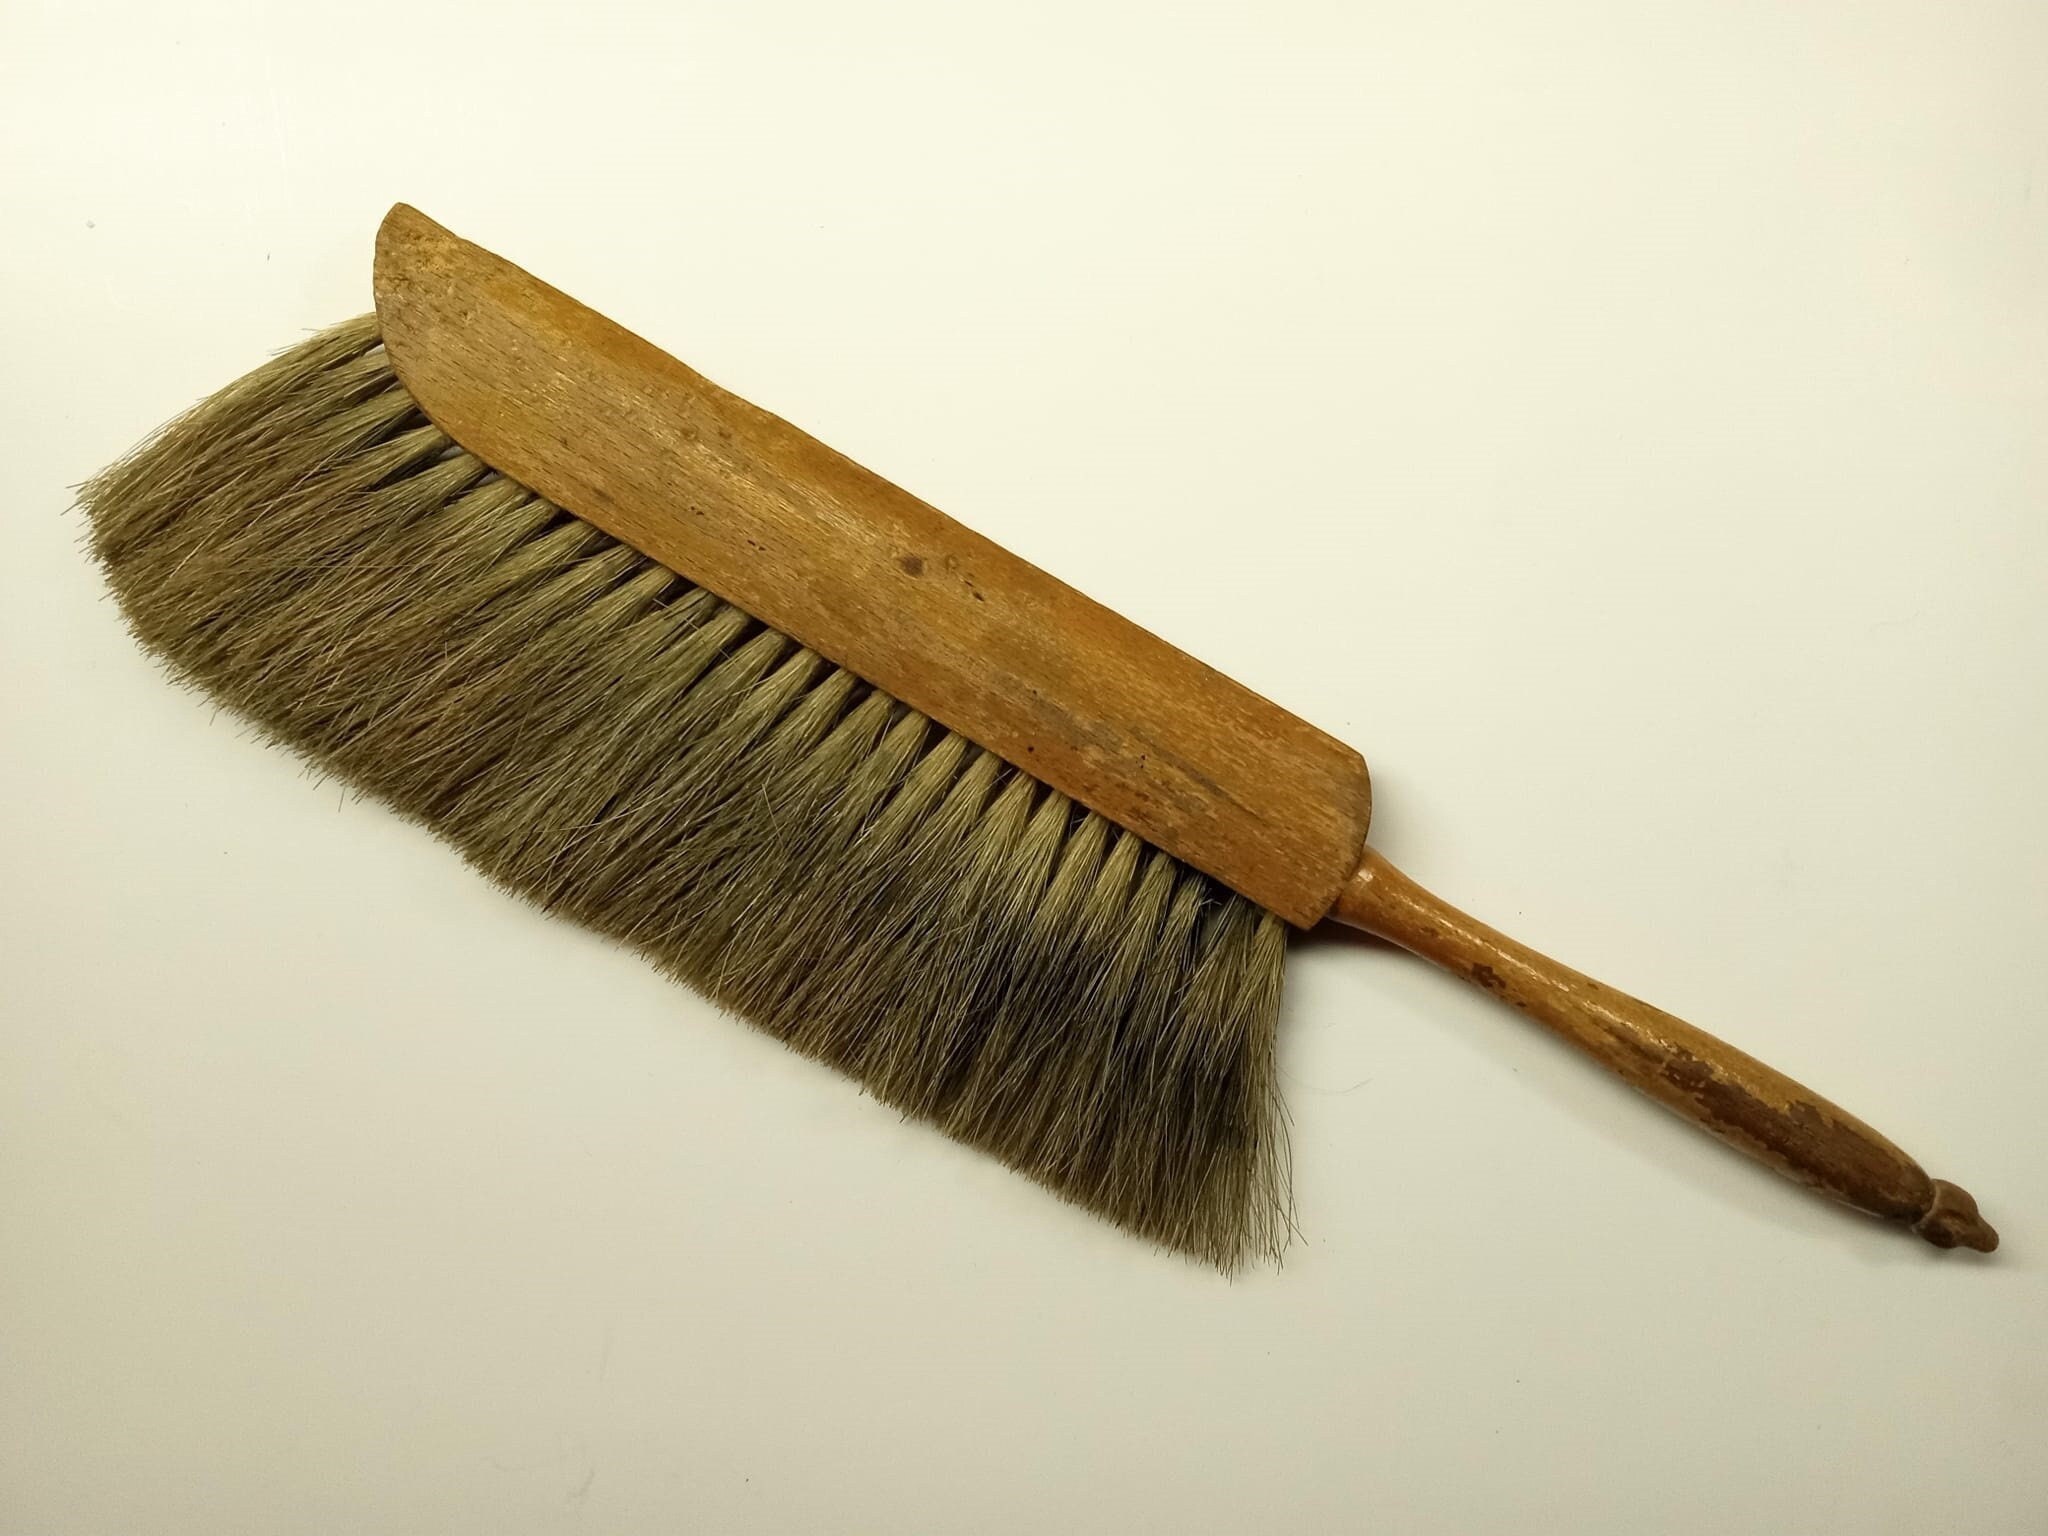 Hand Crafted Vintage Drafting Brush Wooden by West Vintage Trading Company